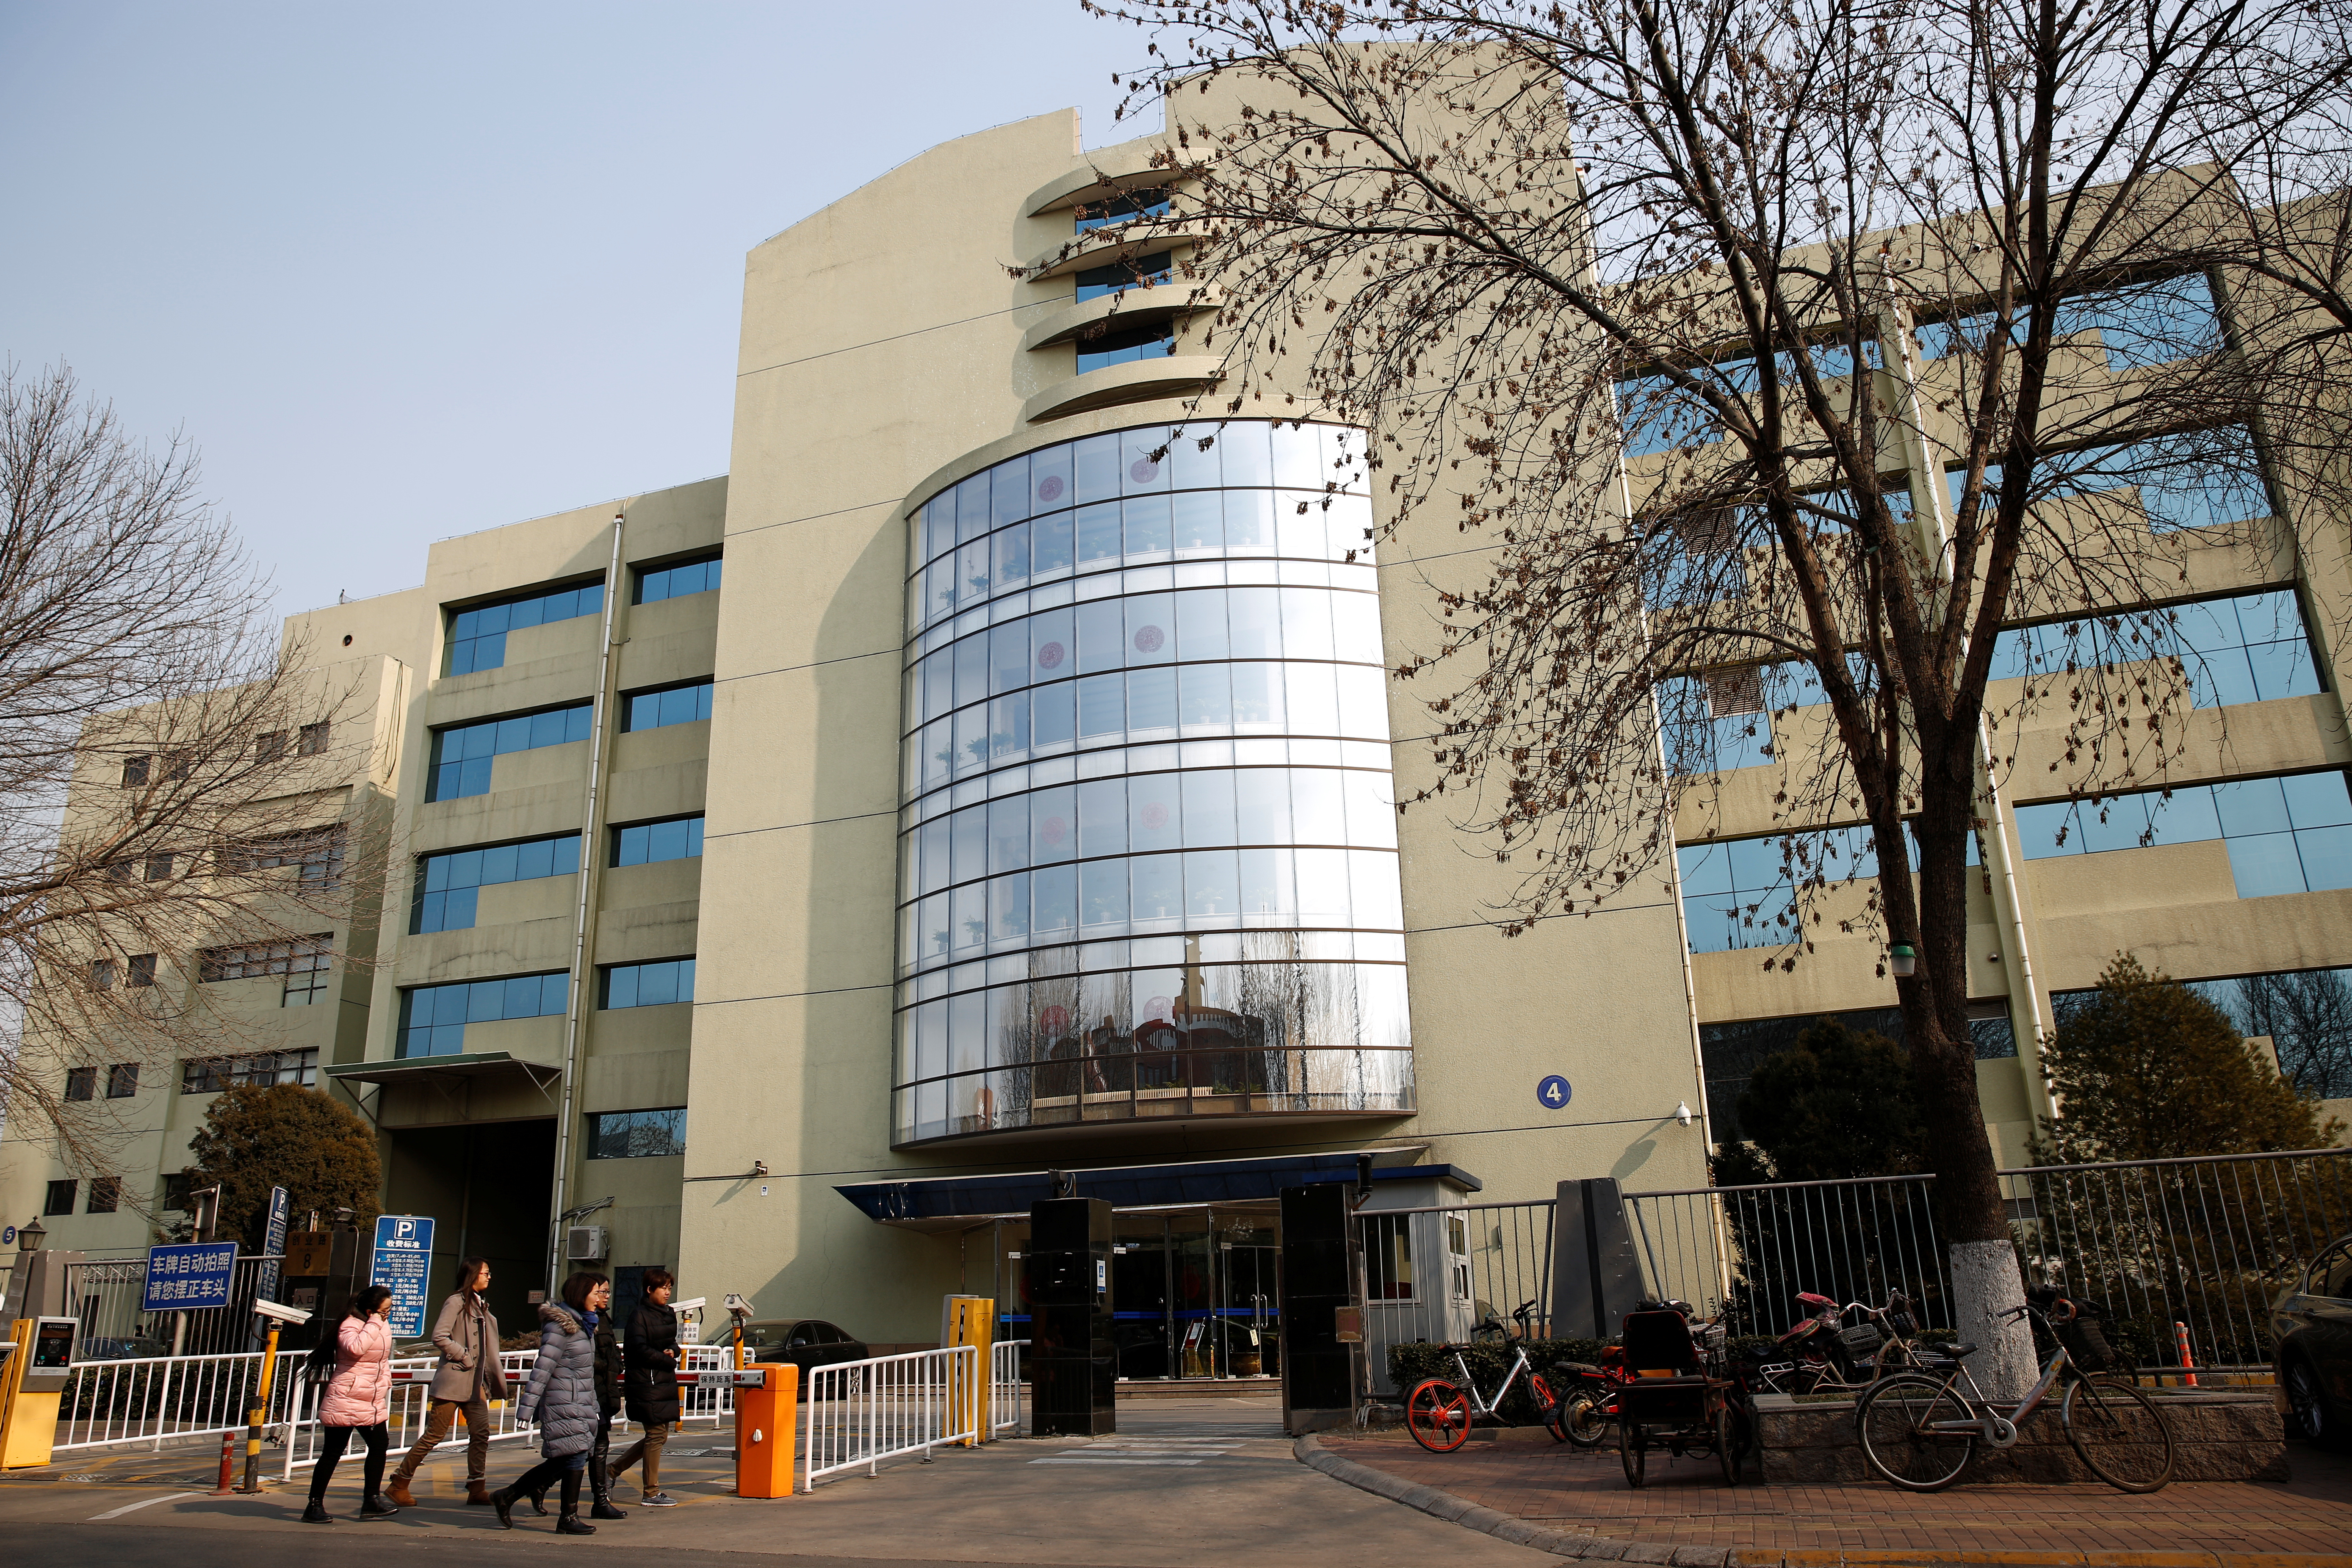 People walk past the building with the listed address of Tomorrow Holdings' Beijing office